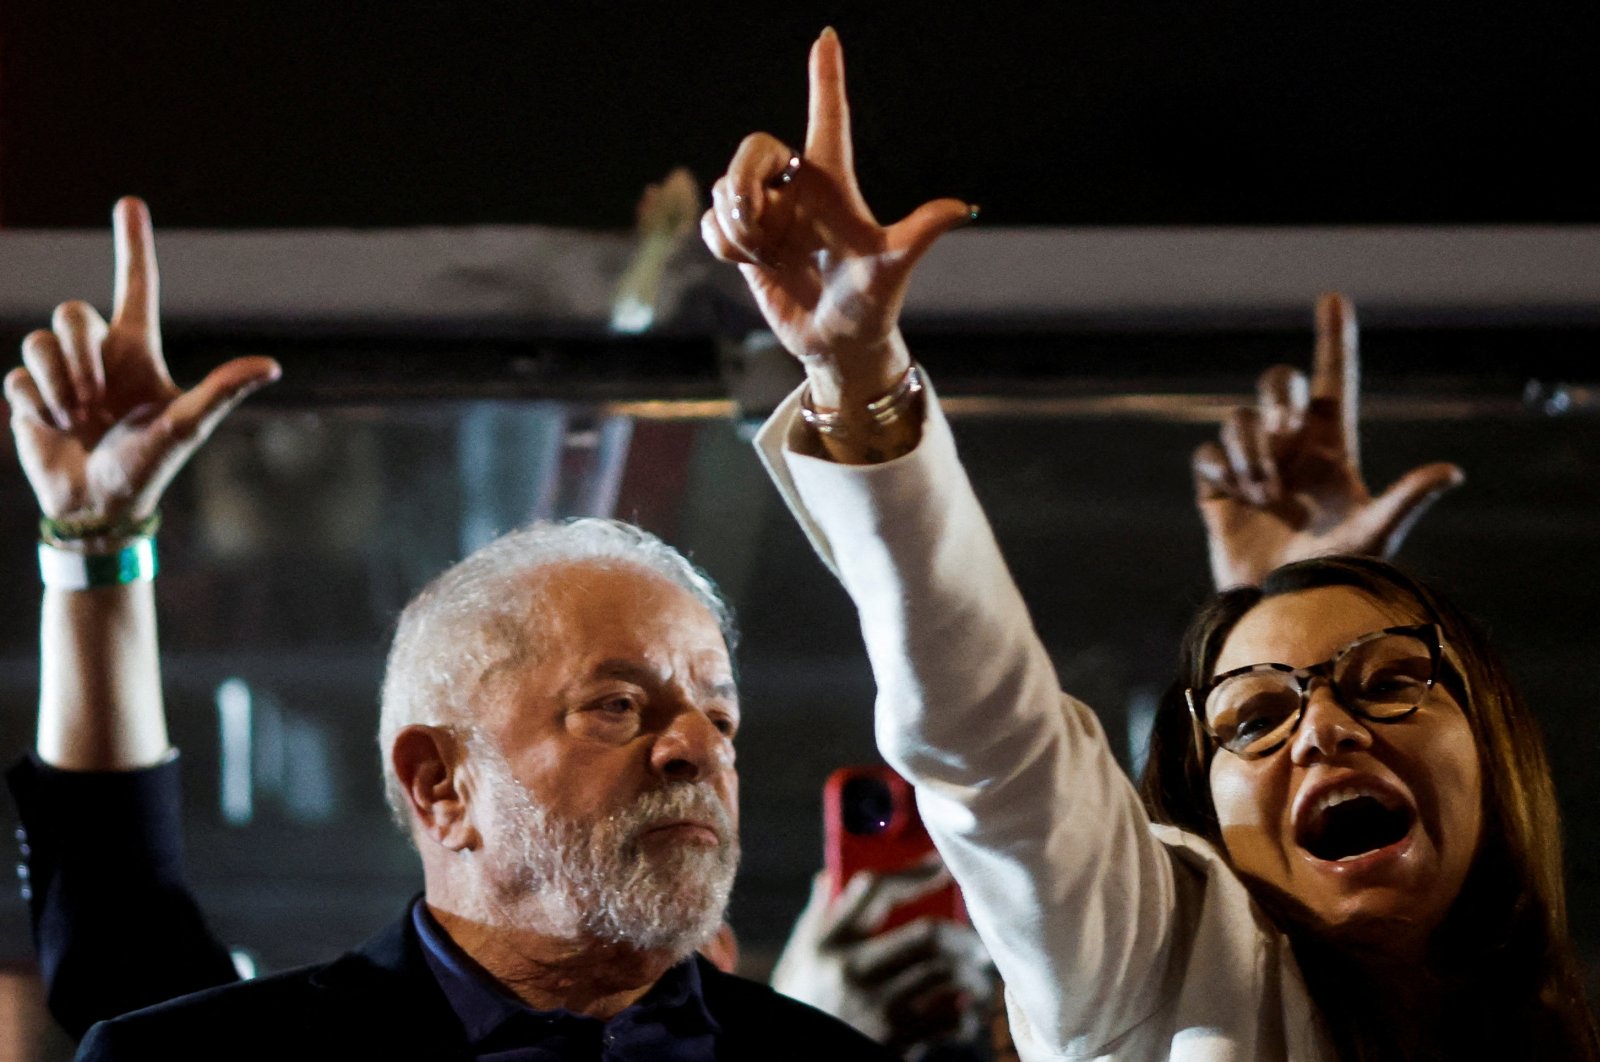 Brazil&#039;s former President and presidential candidate Luiz Inacio Lula da Silva stands next to his wife Rosangela da Silva, on the day of Brazil&#039;s presidential election, in Sao Paulo, Brazil, Oct. 2, 2022. (REUTERS Photo)